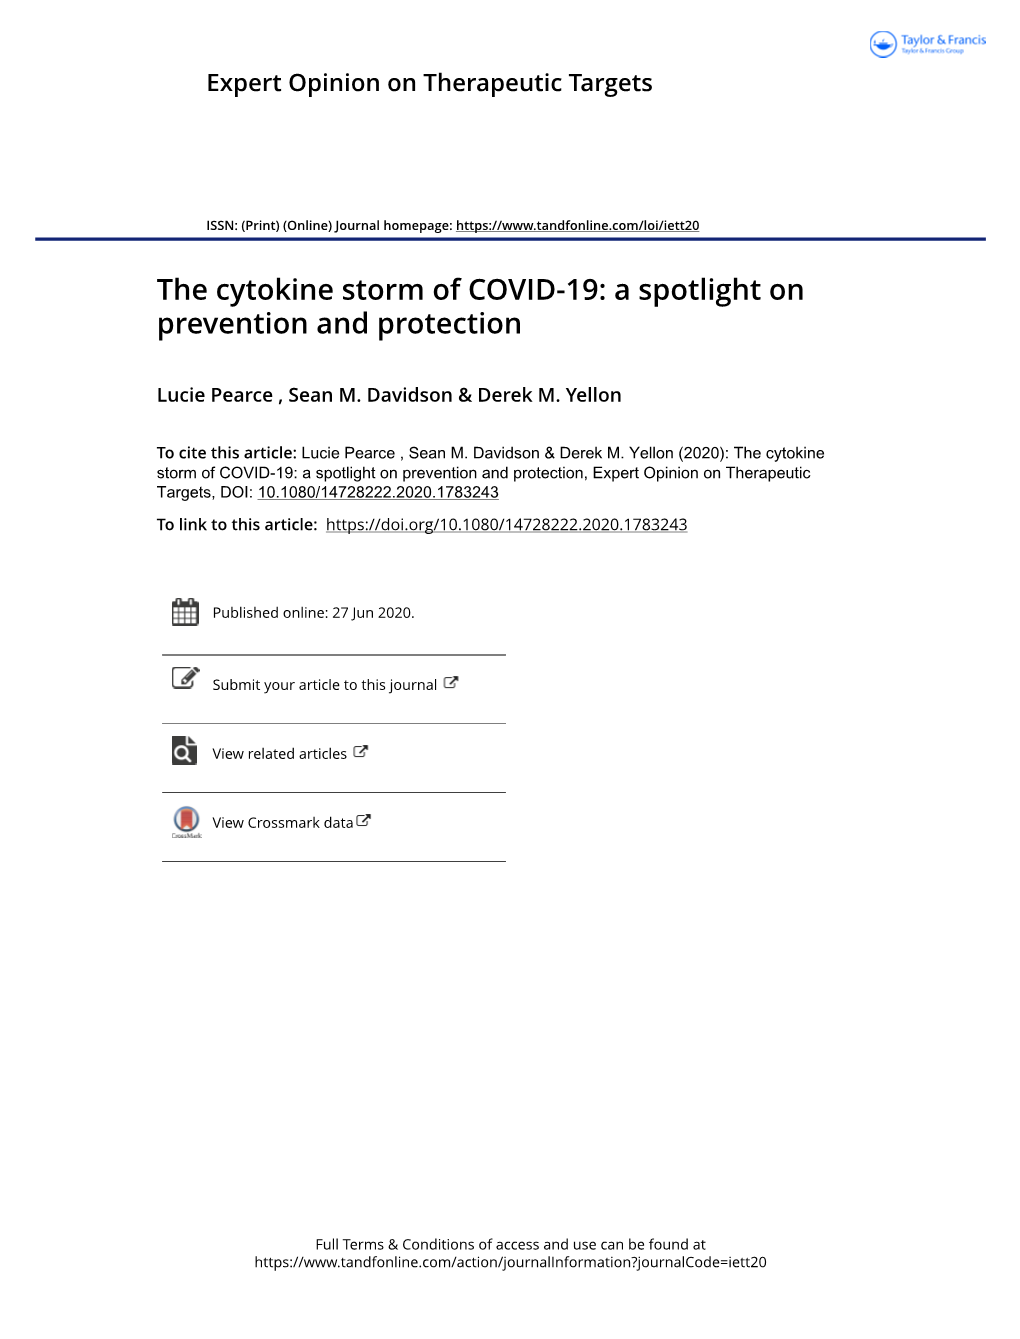 The Cytokine Storm of COVID-19: a Spotlight on Prevention and Protection